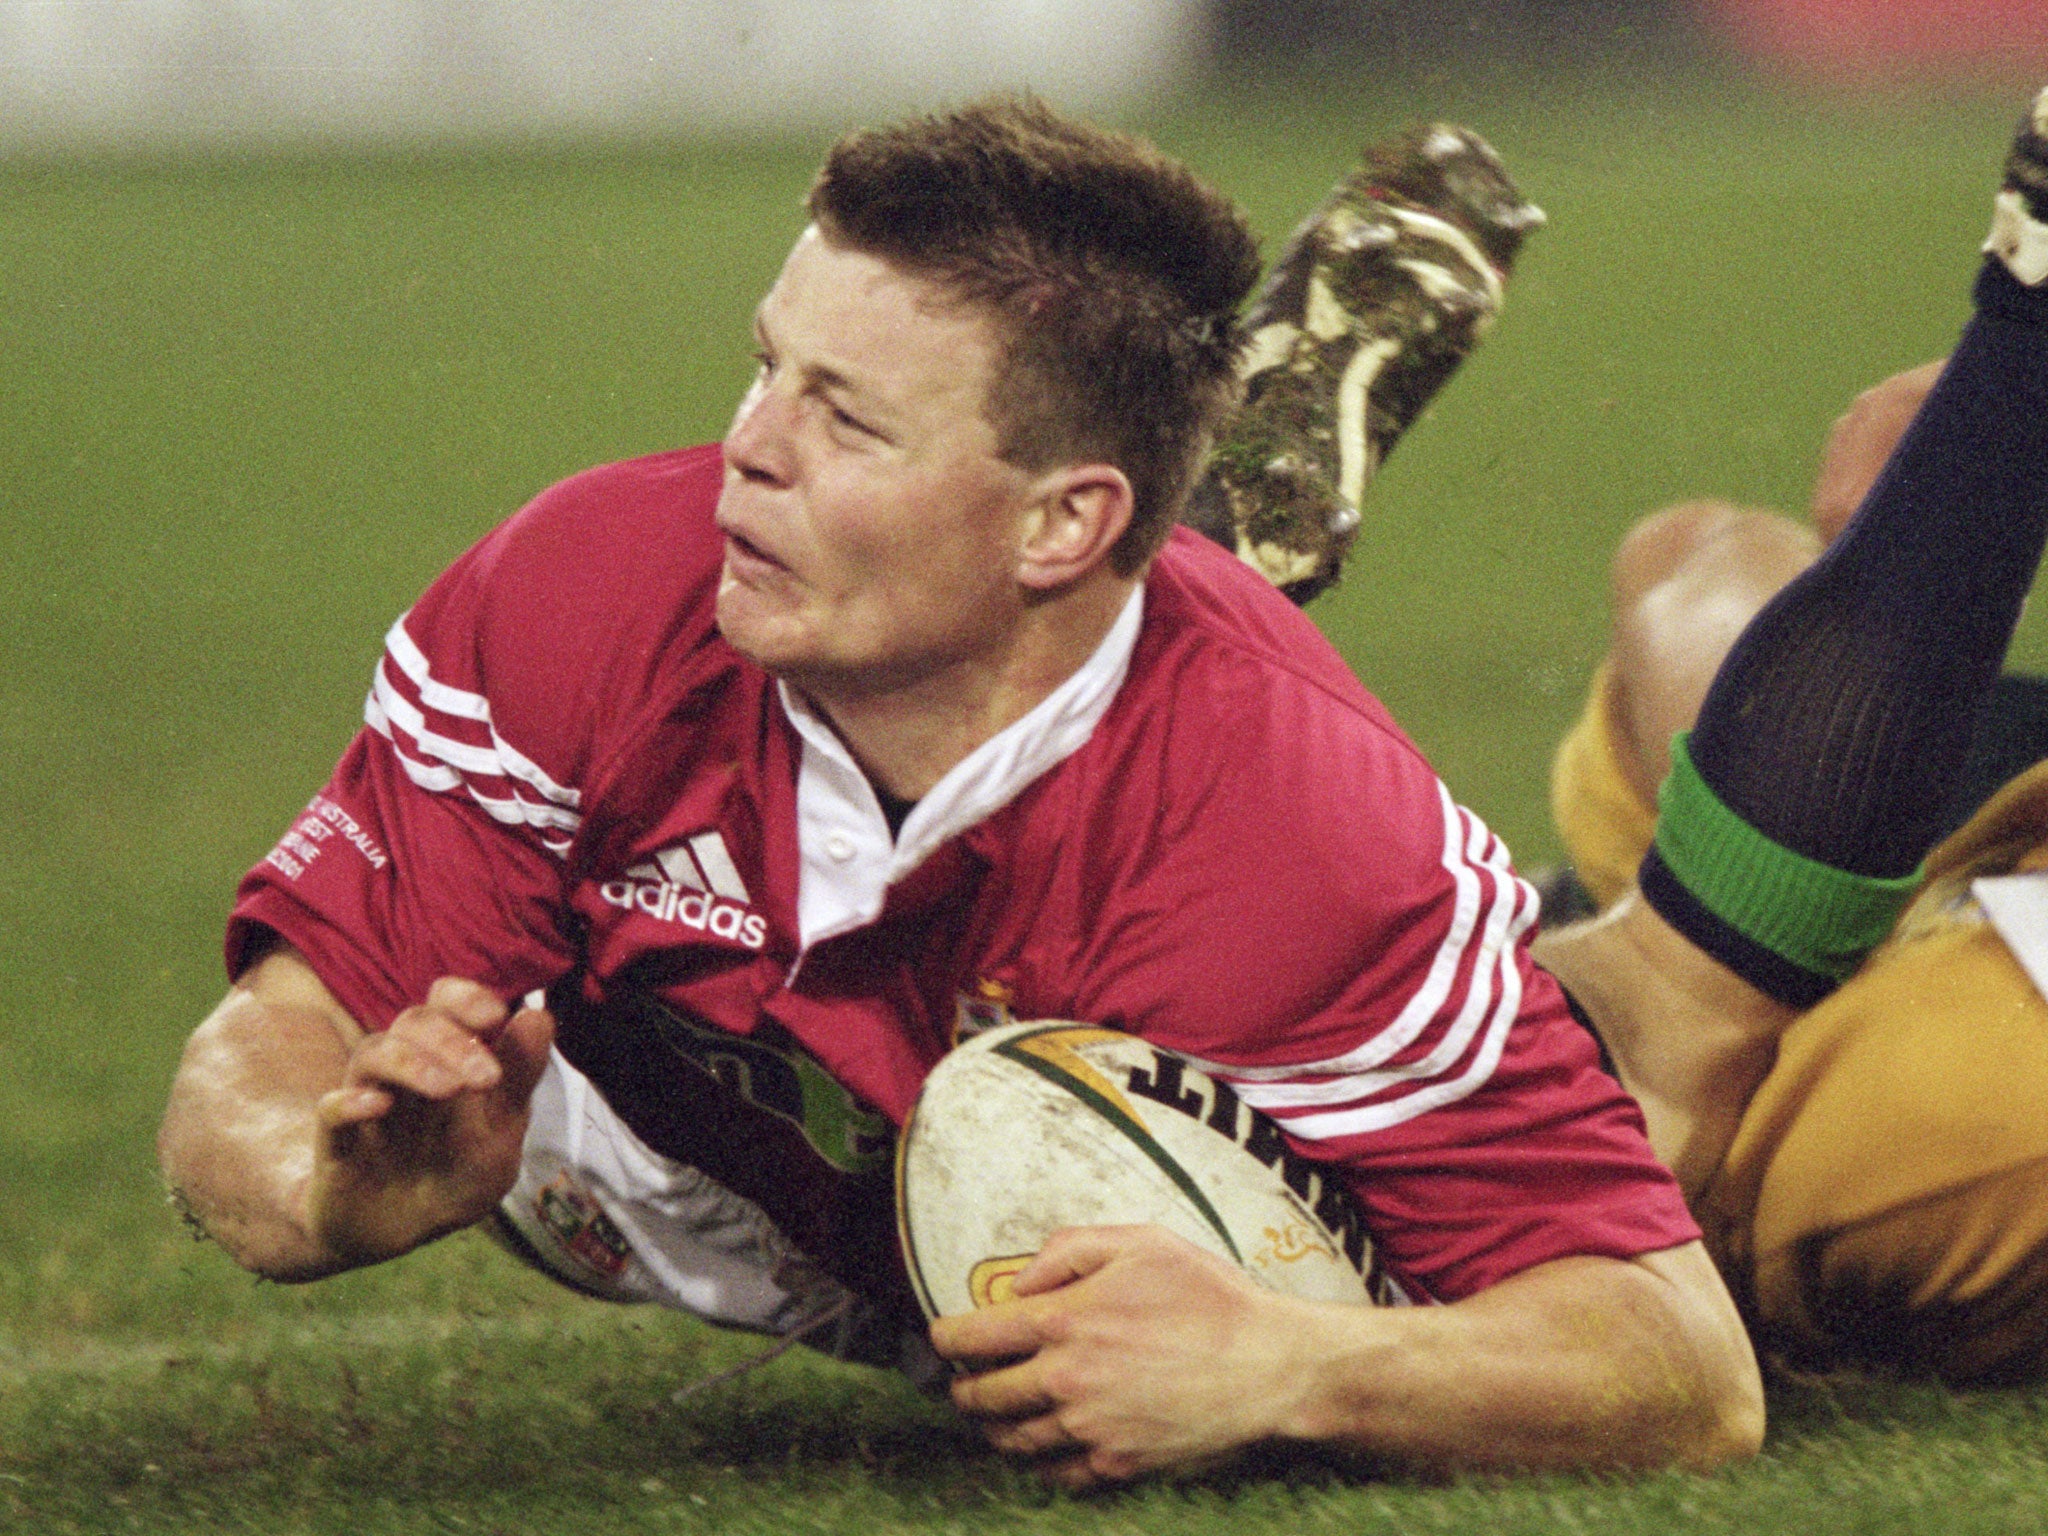 Brian O’Driscoll is relishing the chance of going for glory with the Lions again